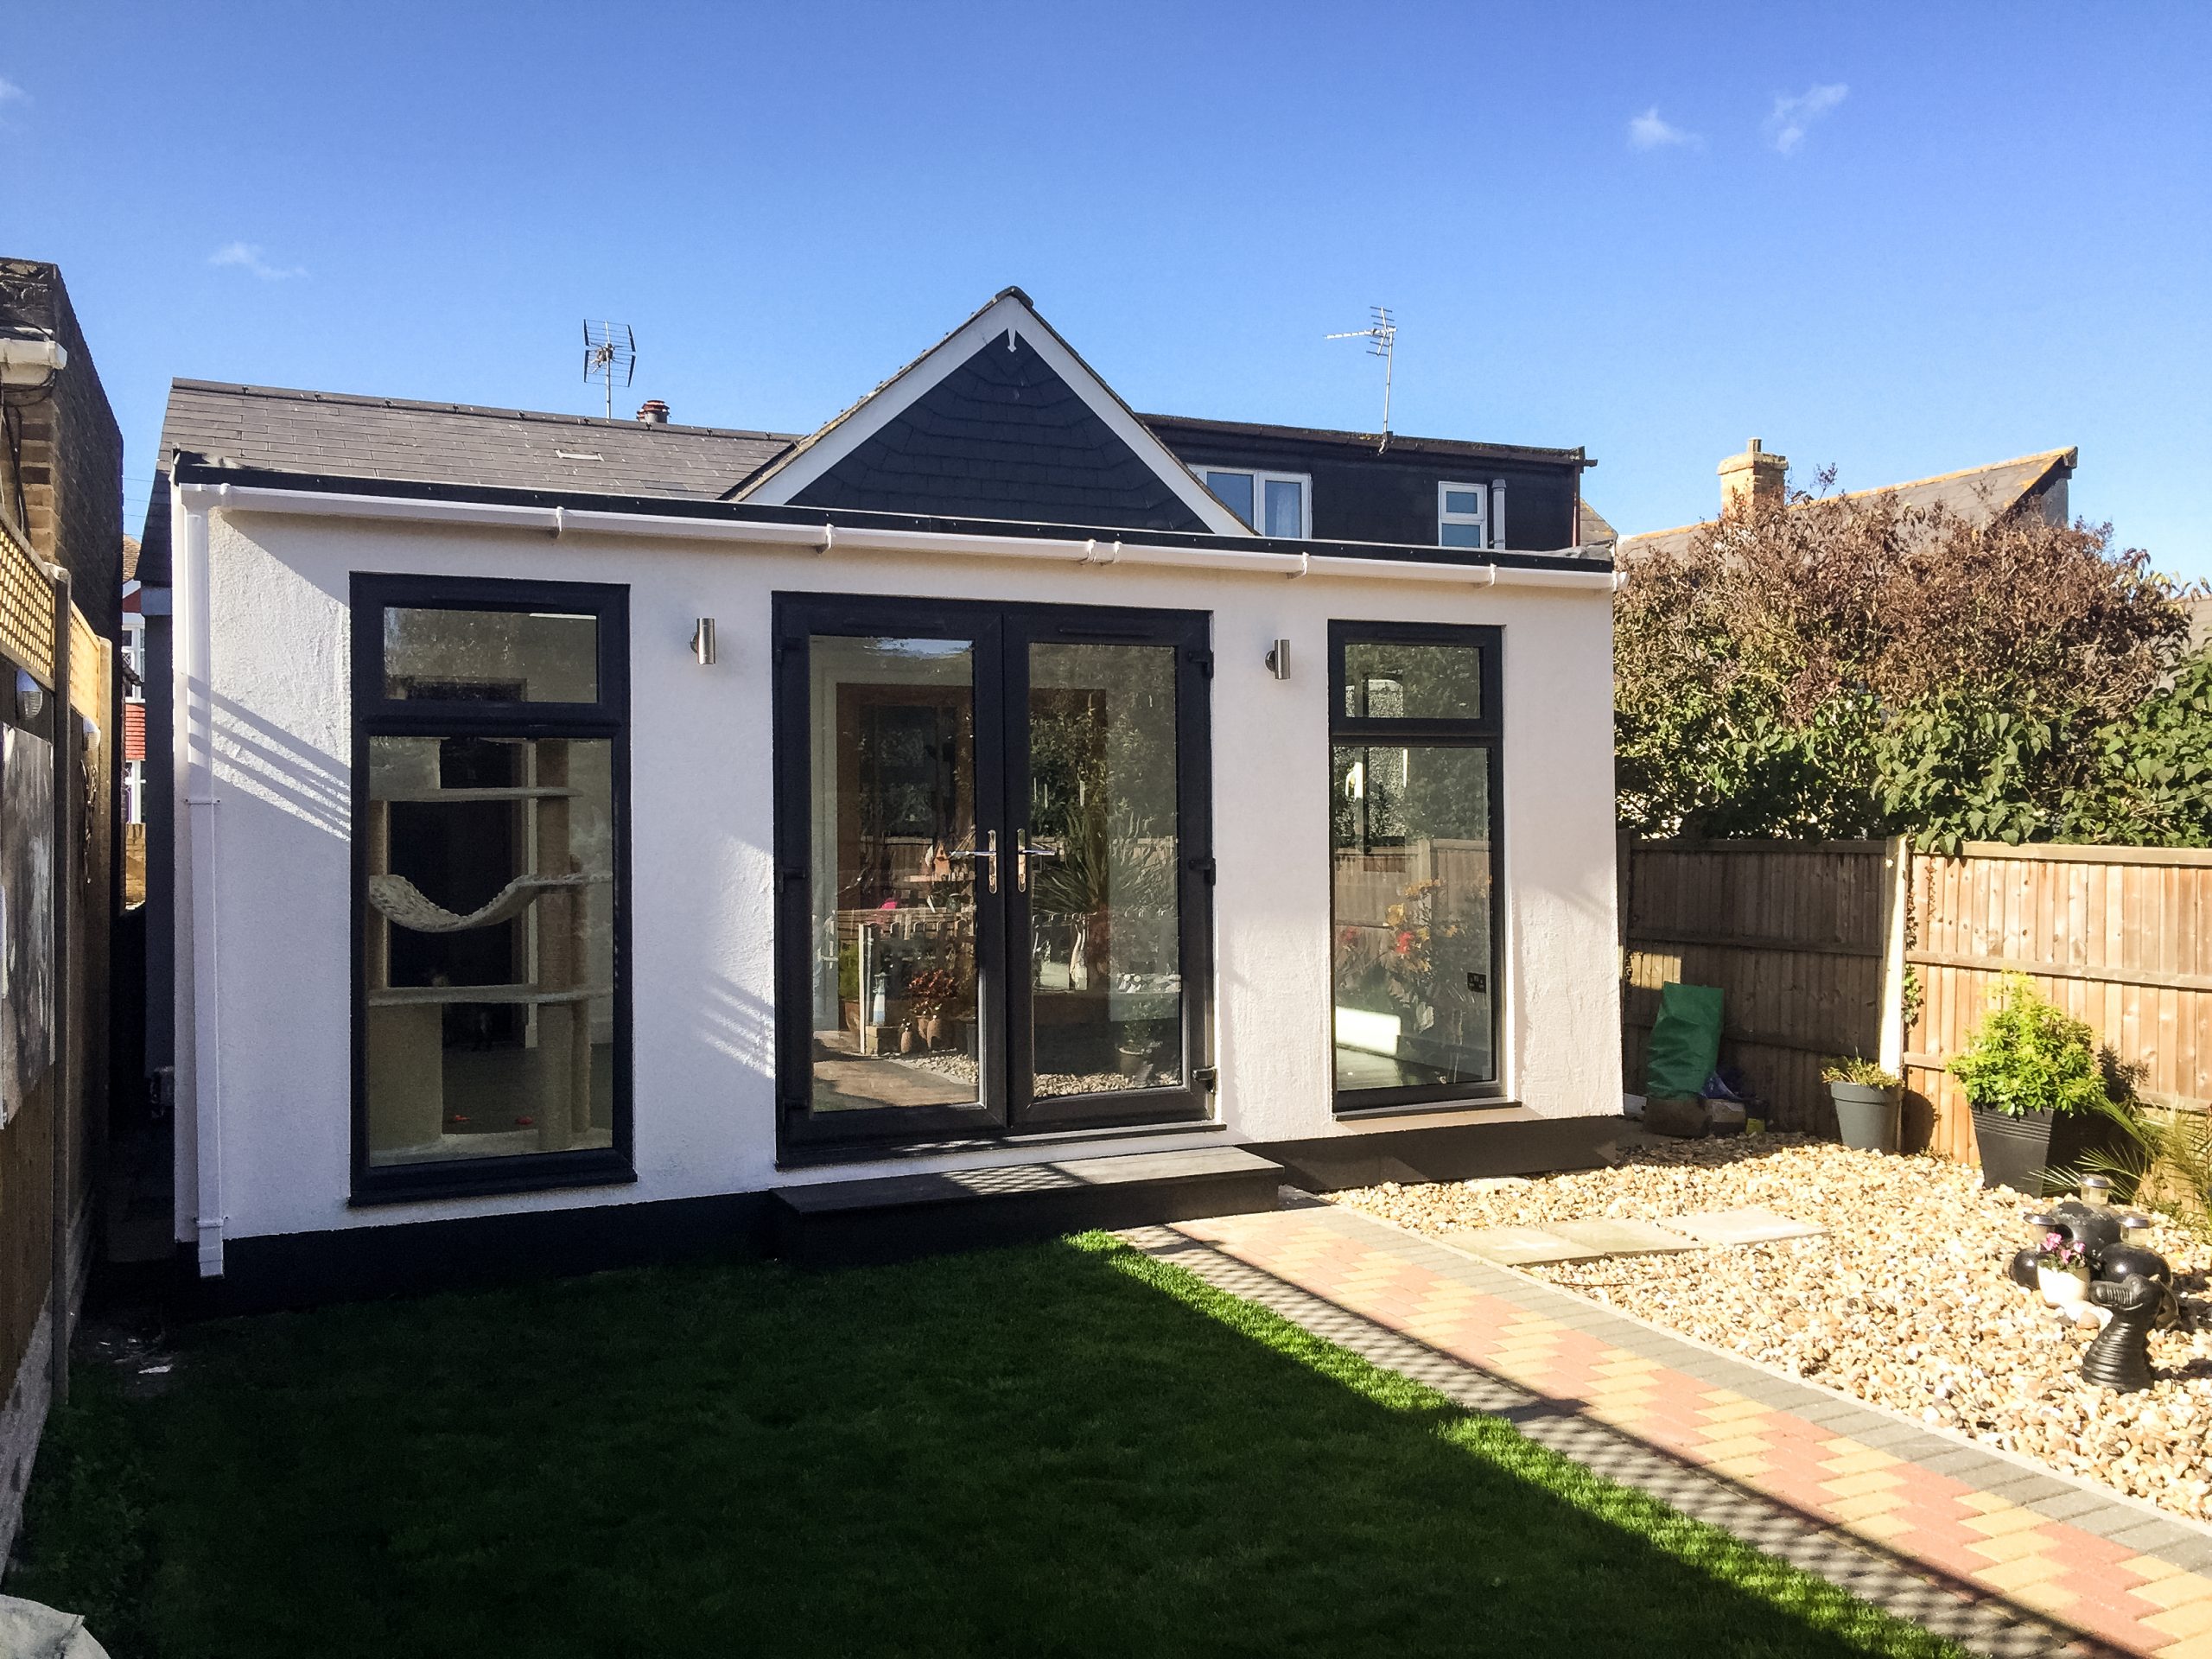 White rendered Vivid Green SIPs house extension with black pitched roof, anthracite grey framed glass door and windows and bricked walkway leading to entrance bordered by gravel and grass